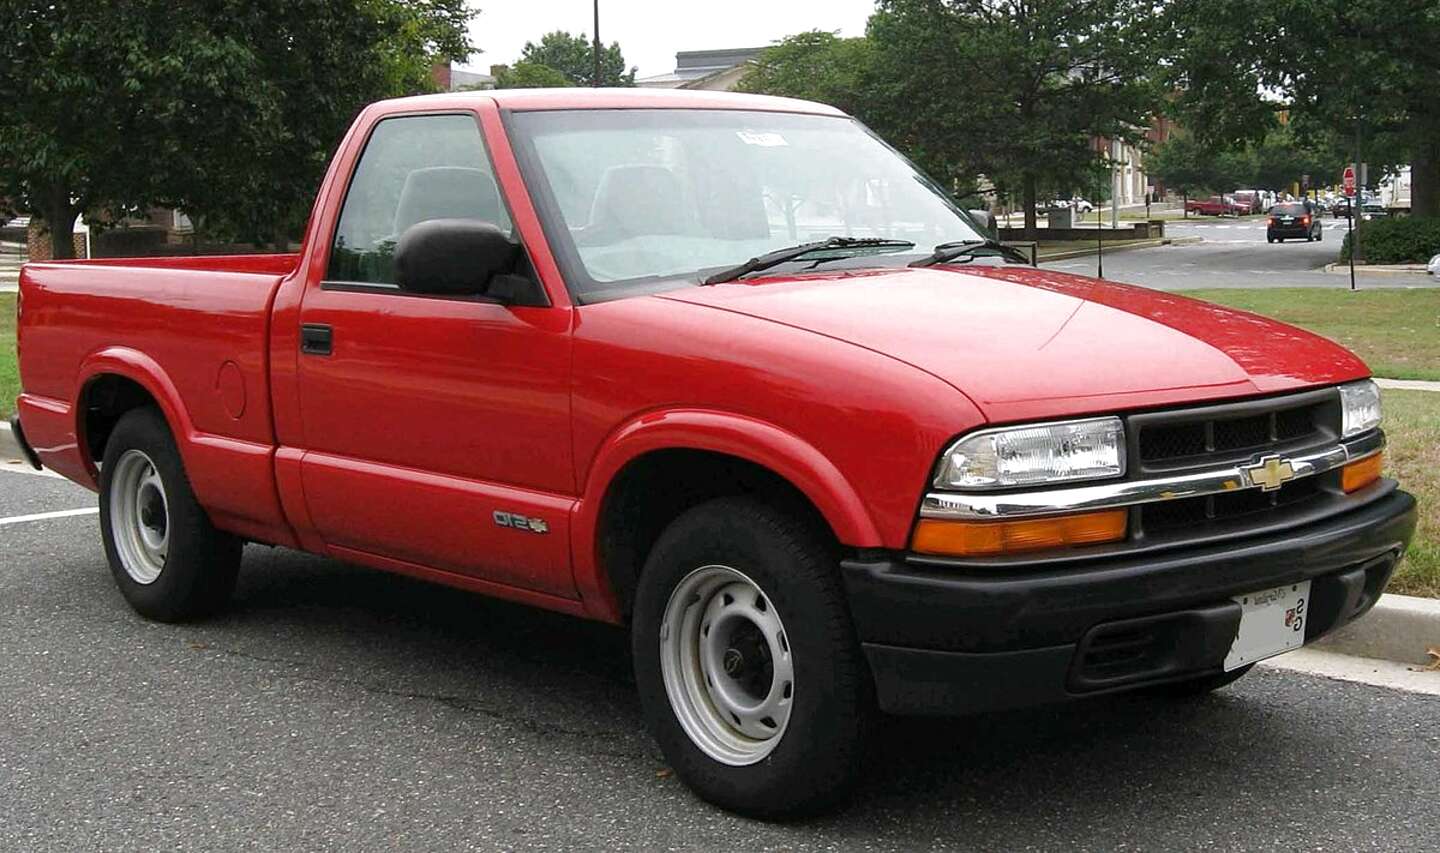 Chevy S10 for sale in UK | 42 used Chevy S10